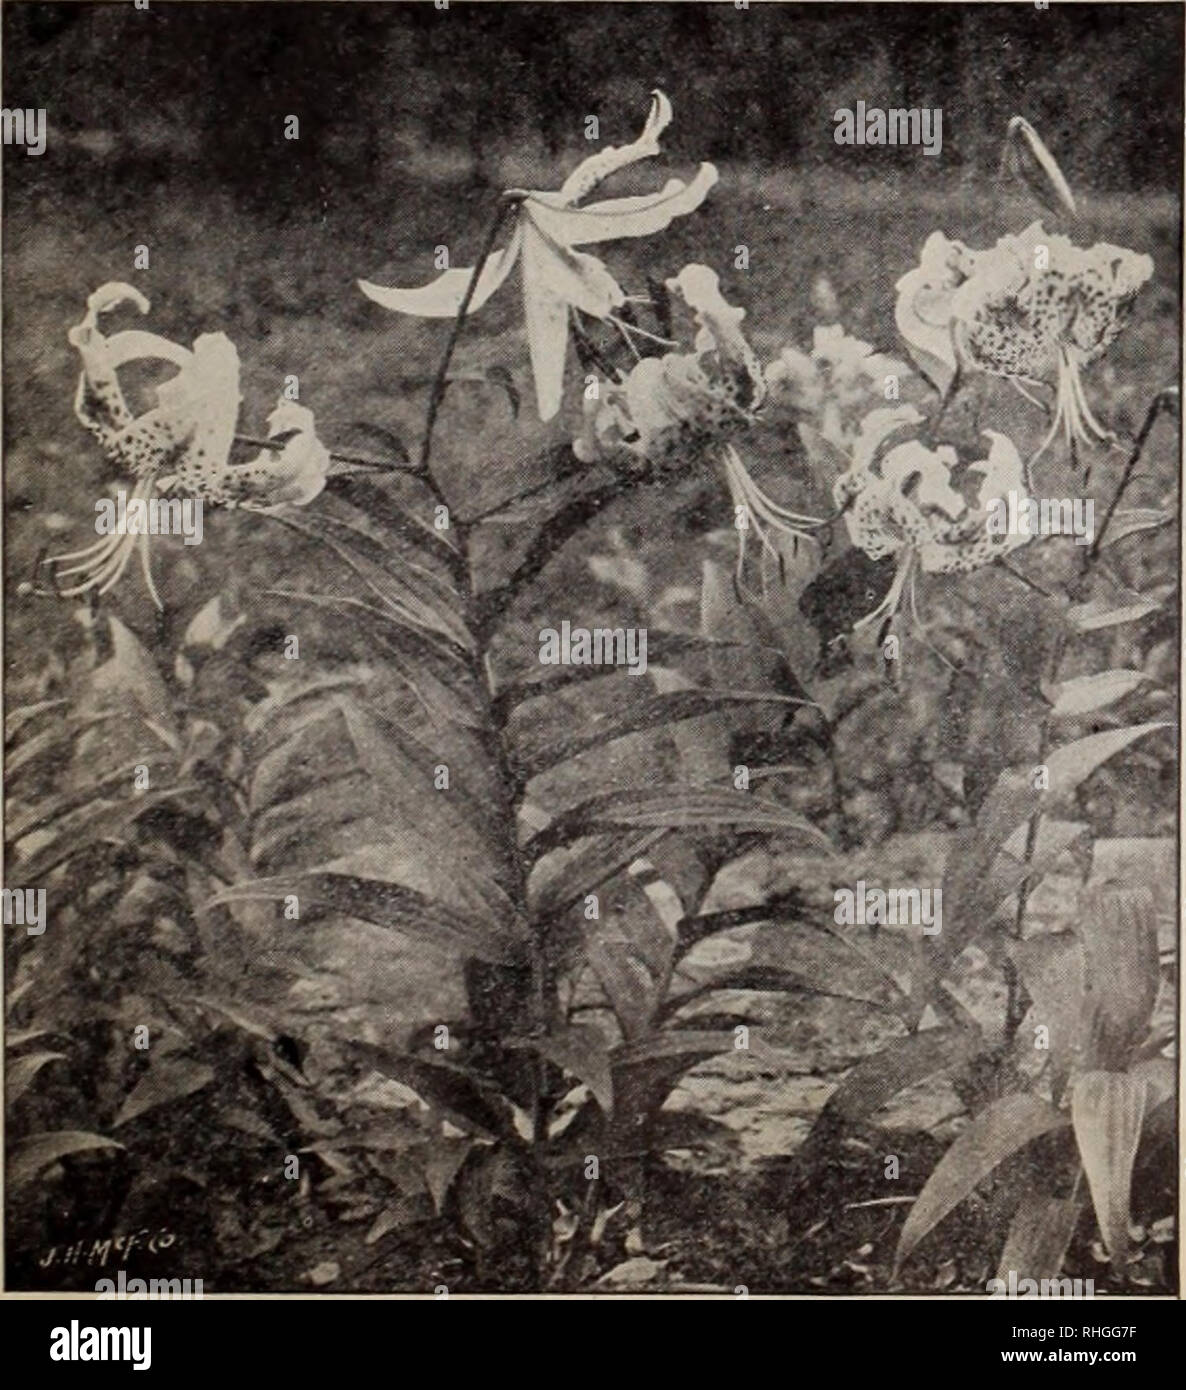 . Boddington's quality bulbs, seeds and plants / Arthur T. Boddington.. Nursery Catalogue. Lilium auratum (type) RARE LILIUM AURATUMS LILIUM AURATUM MACRANTHUM. Another grand type of the Golden-banded Lily. Large bulbs, 50 cts. each, $4 per doz., $30 per 100,. Lilium speciosum (type) LILIUM AURATUM PICTUM. A very choice Each Doz. 100 type of Liluirn auratum ; pure white, with red and yellow bands through each petal. Large bulbs ...jfo 30 $3 00 $20 00 LILIUM AURATUM PLATYPHYLLUM. A very strong and vigorous type of L. auratum. Flowers of immense size, pure ivory-white, with a deep golden band th Stock Photo